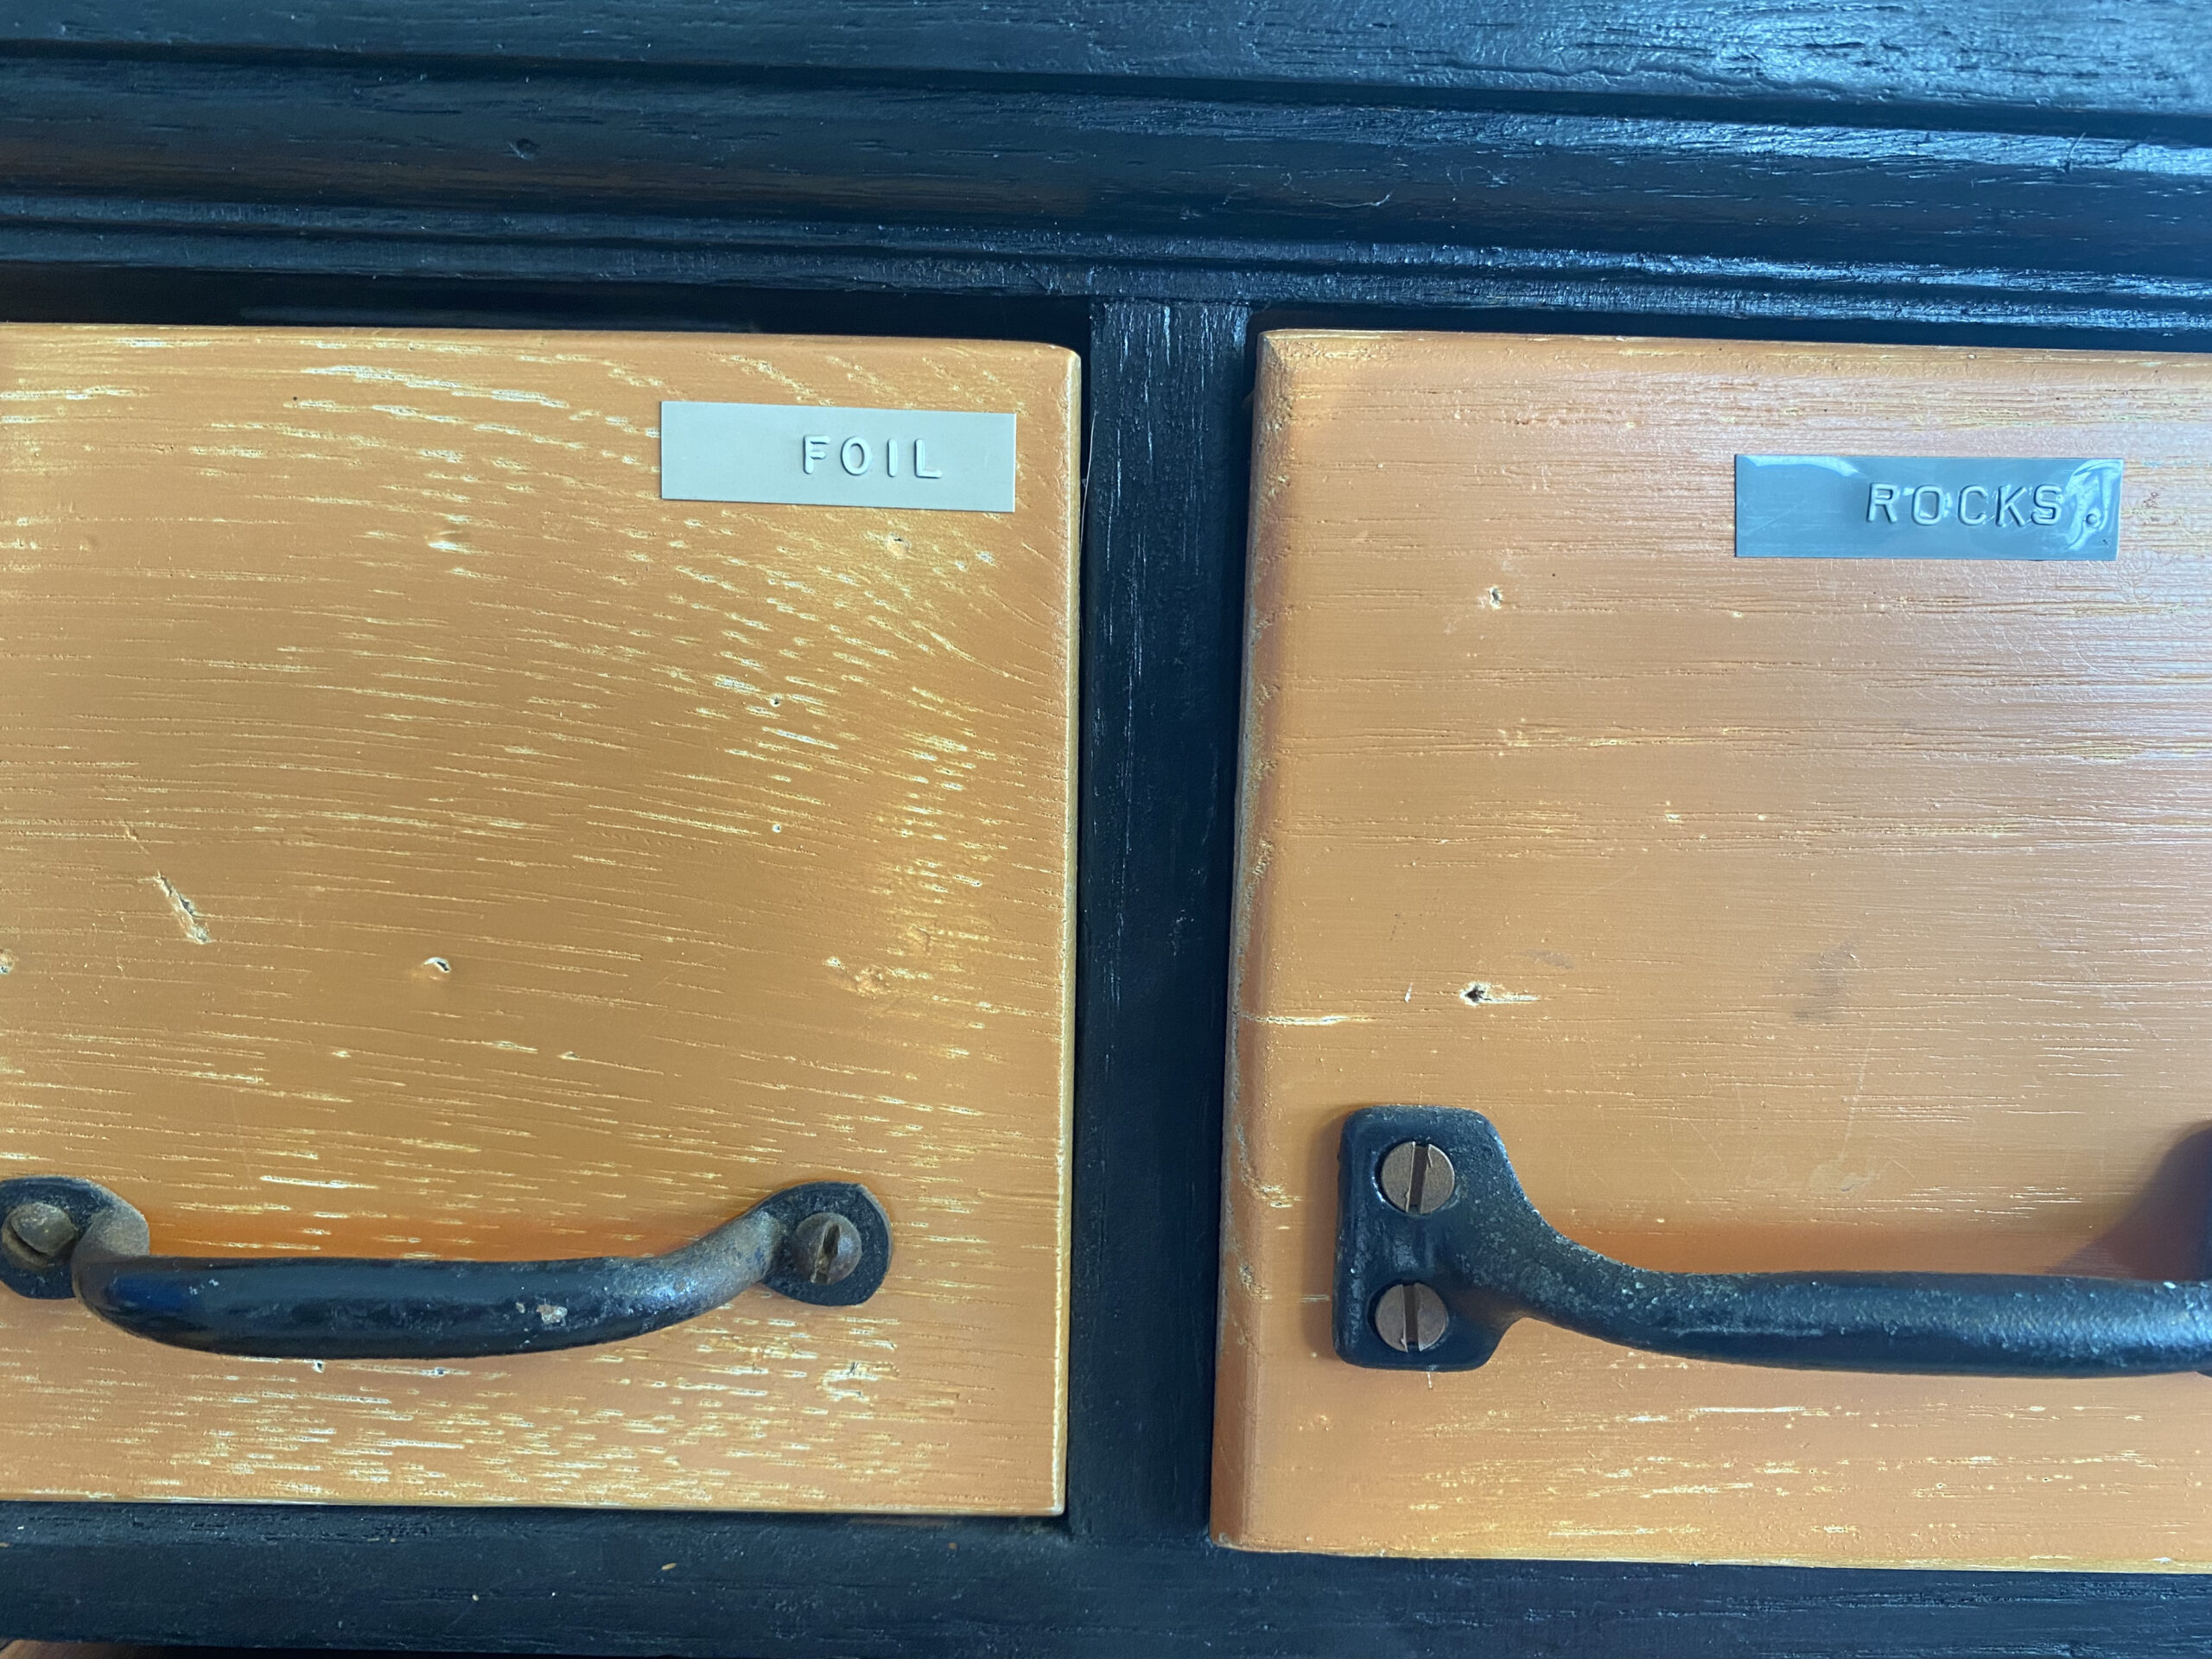 A converted Dewey Decimal library card catalog Mabel used to organize found objects.